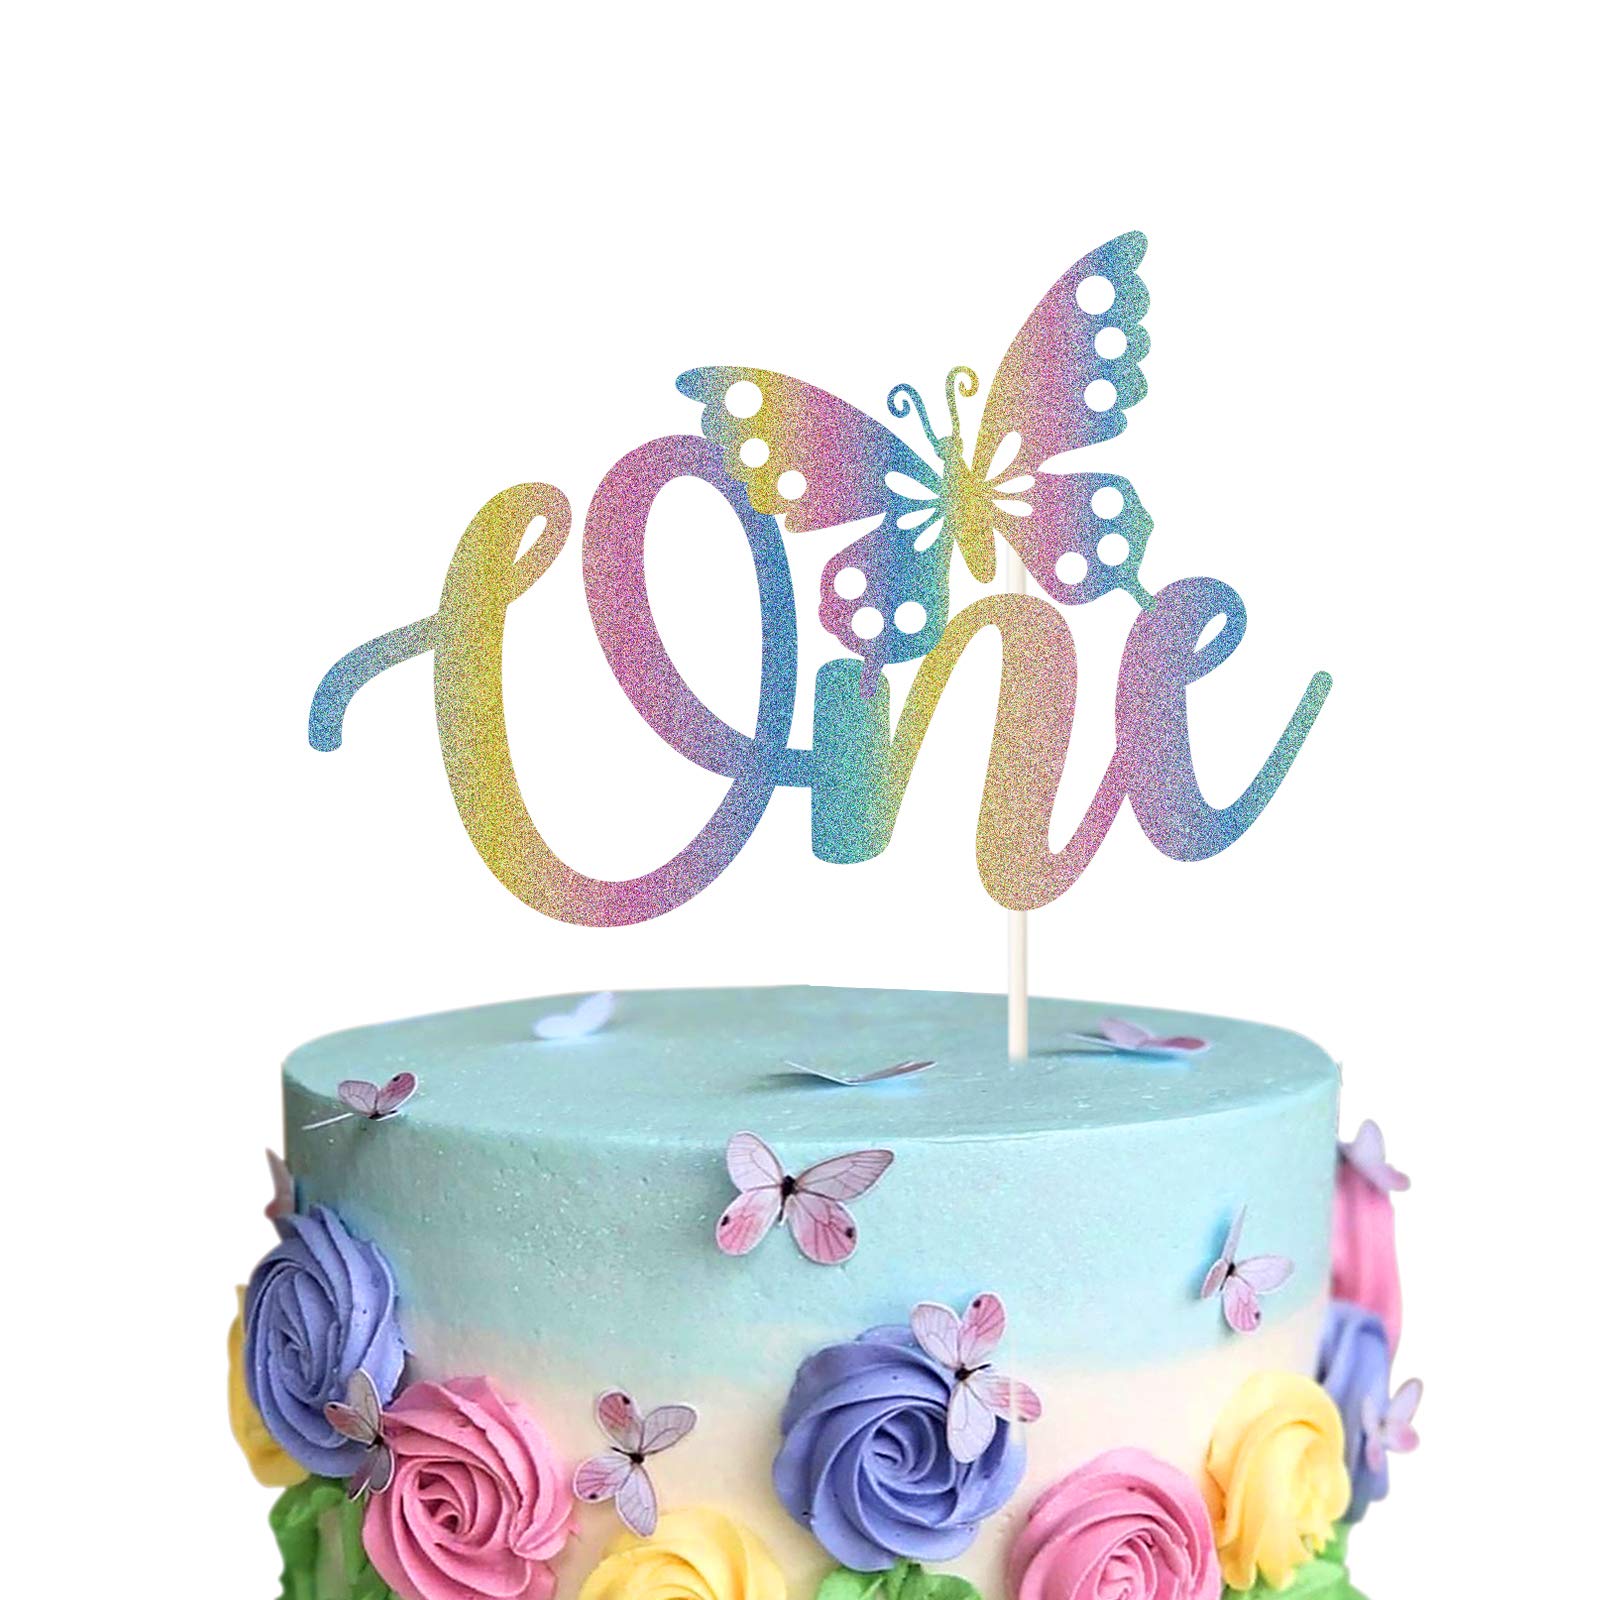 Colorful birthday cake with butterfly decorations